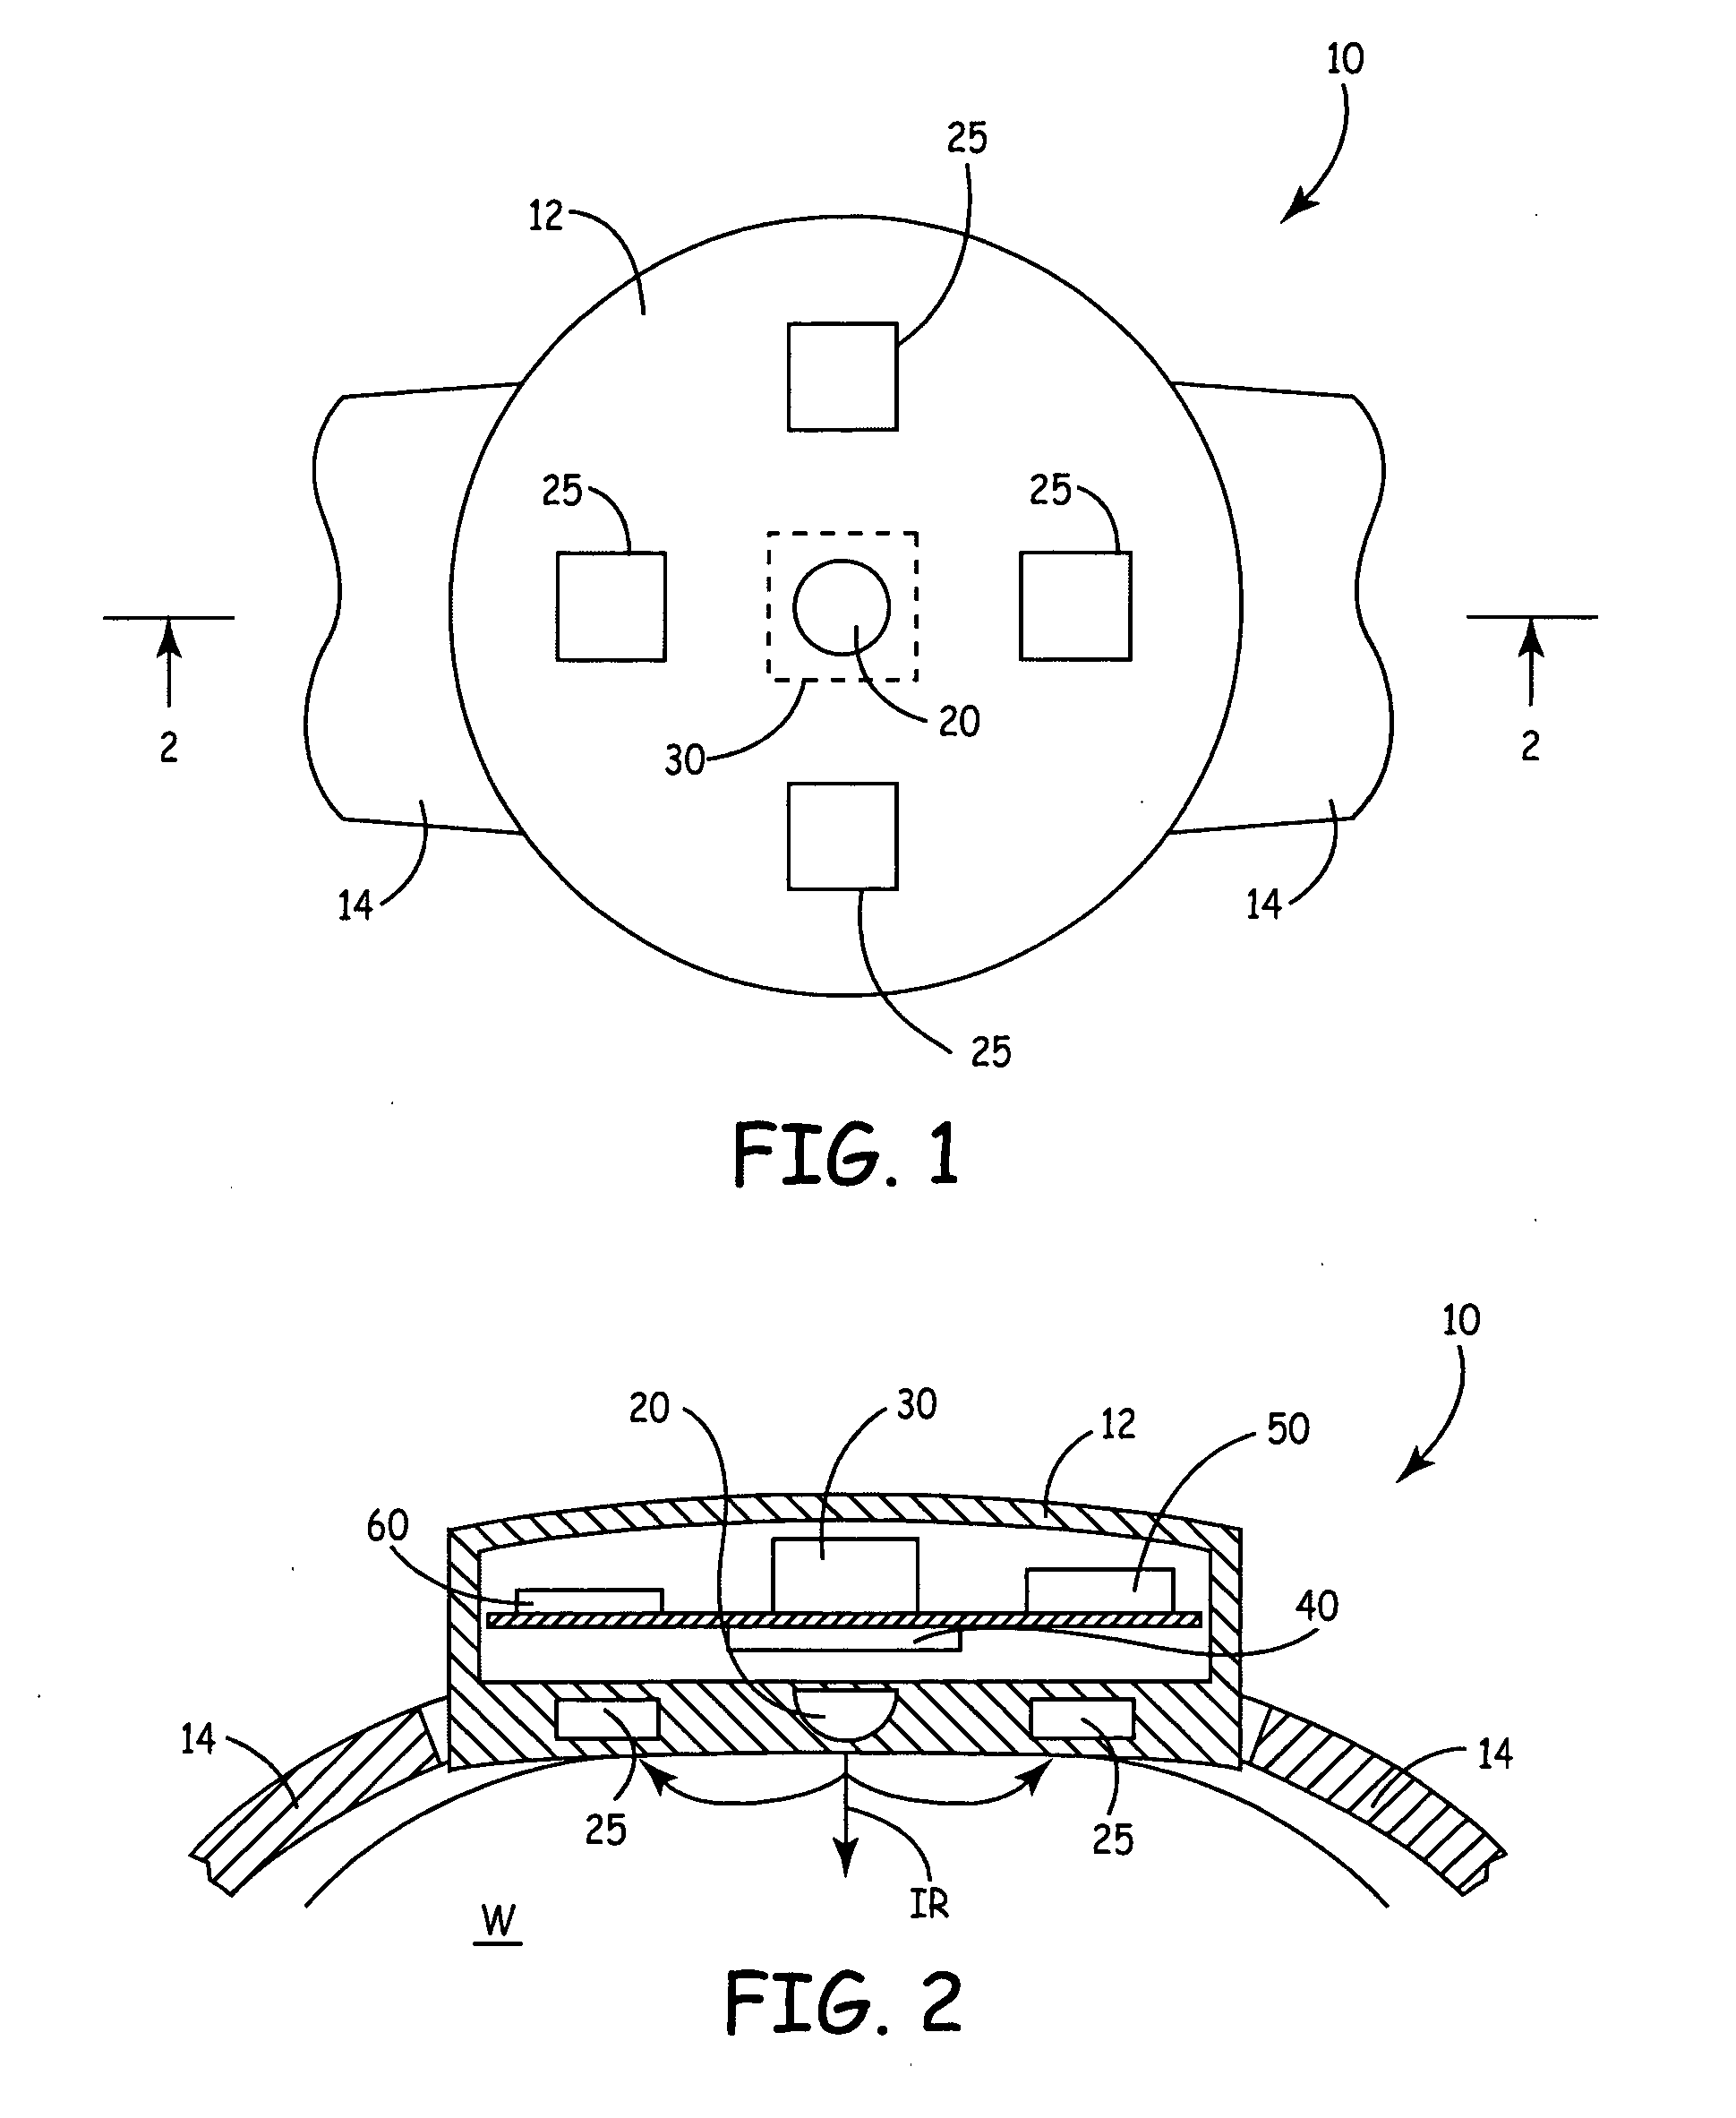 Externally worn vasovagal syncope detection device